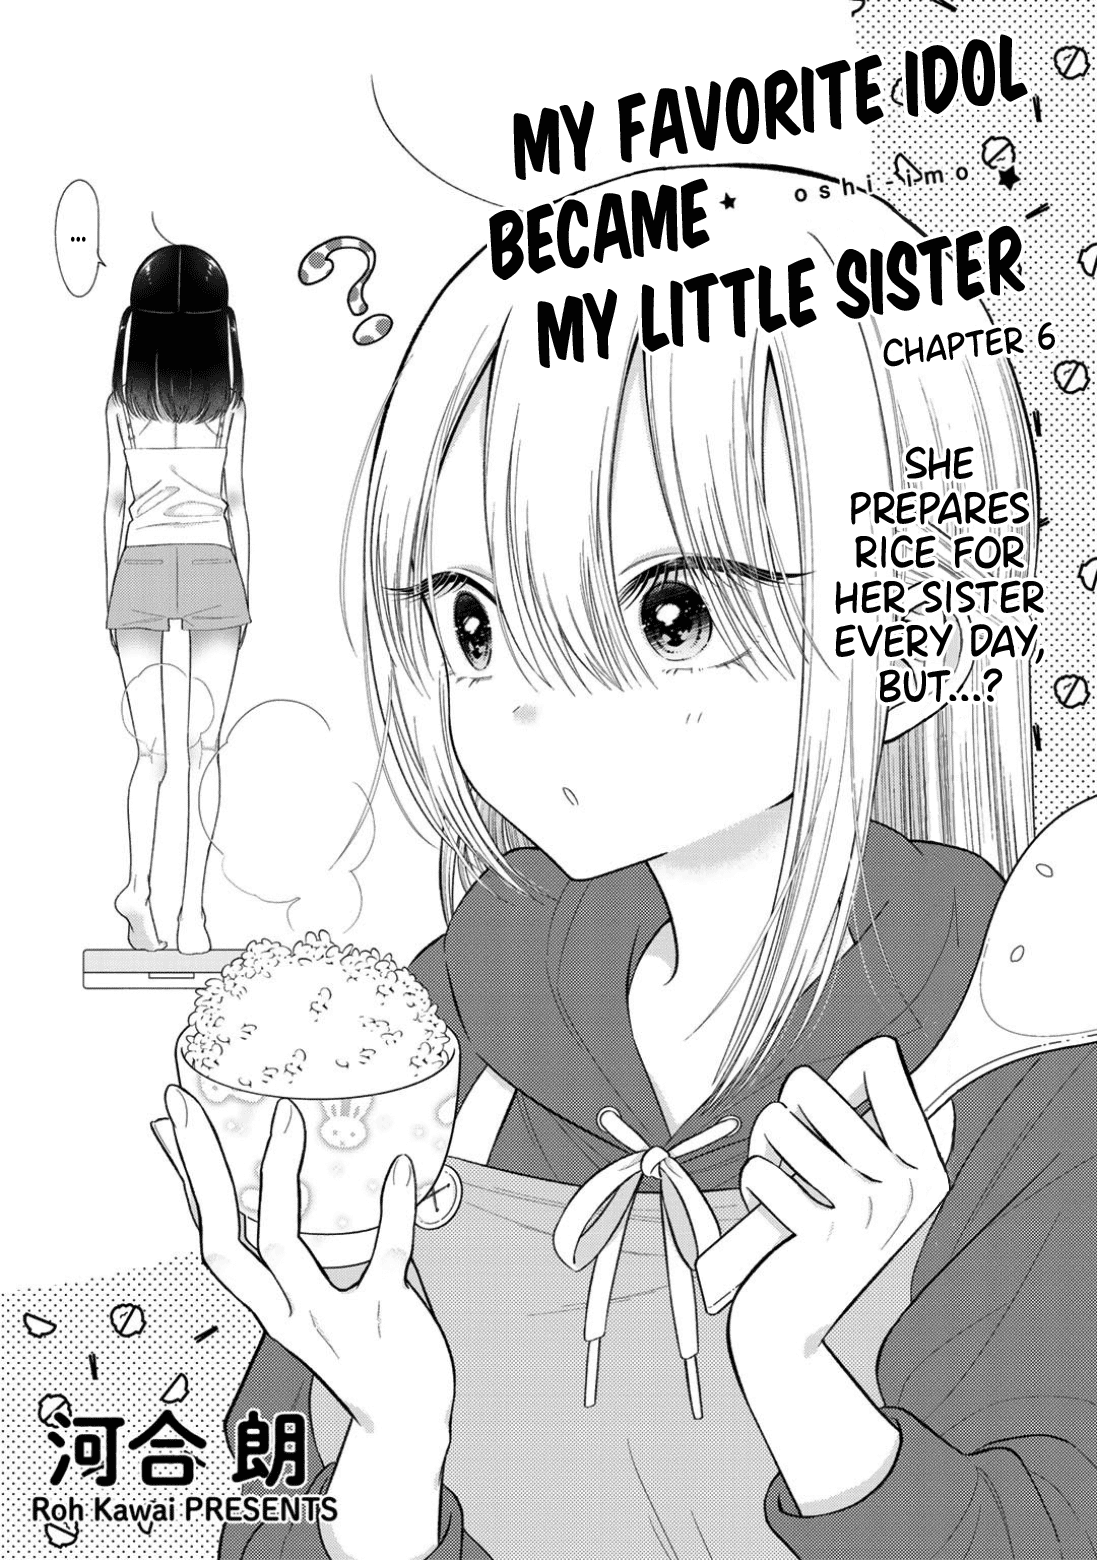 My Favorite Idol Became My Little Sister Chapter 6 #1